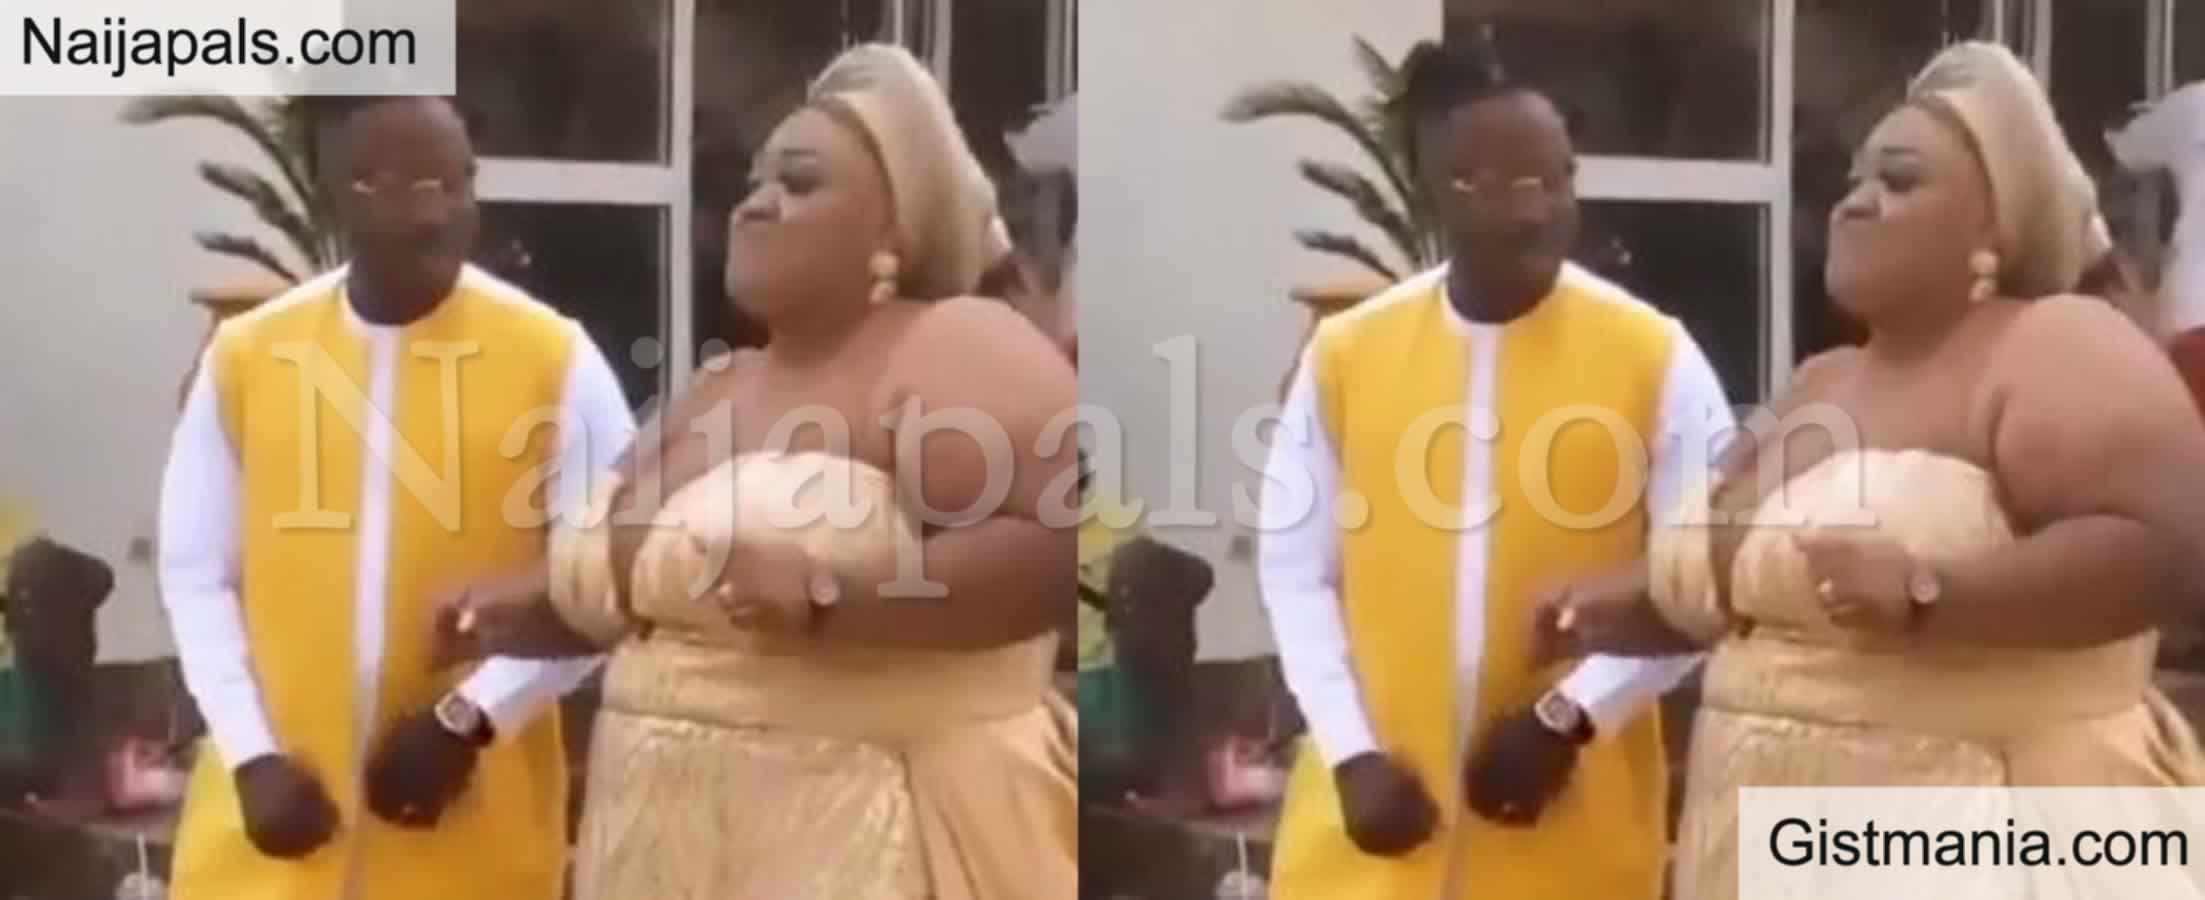 <img alt='.' class='lazyload' data-src='https://img.gistmania.com/emot/grin.gif' /><b> Viral Video of Plus-Size Bride Dancing With Her Lanky Groom</b>